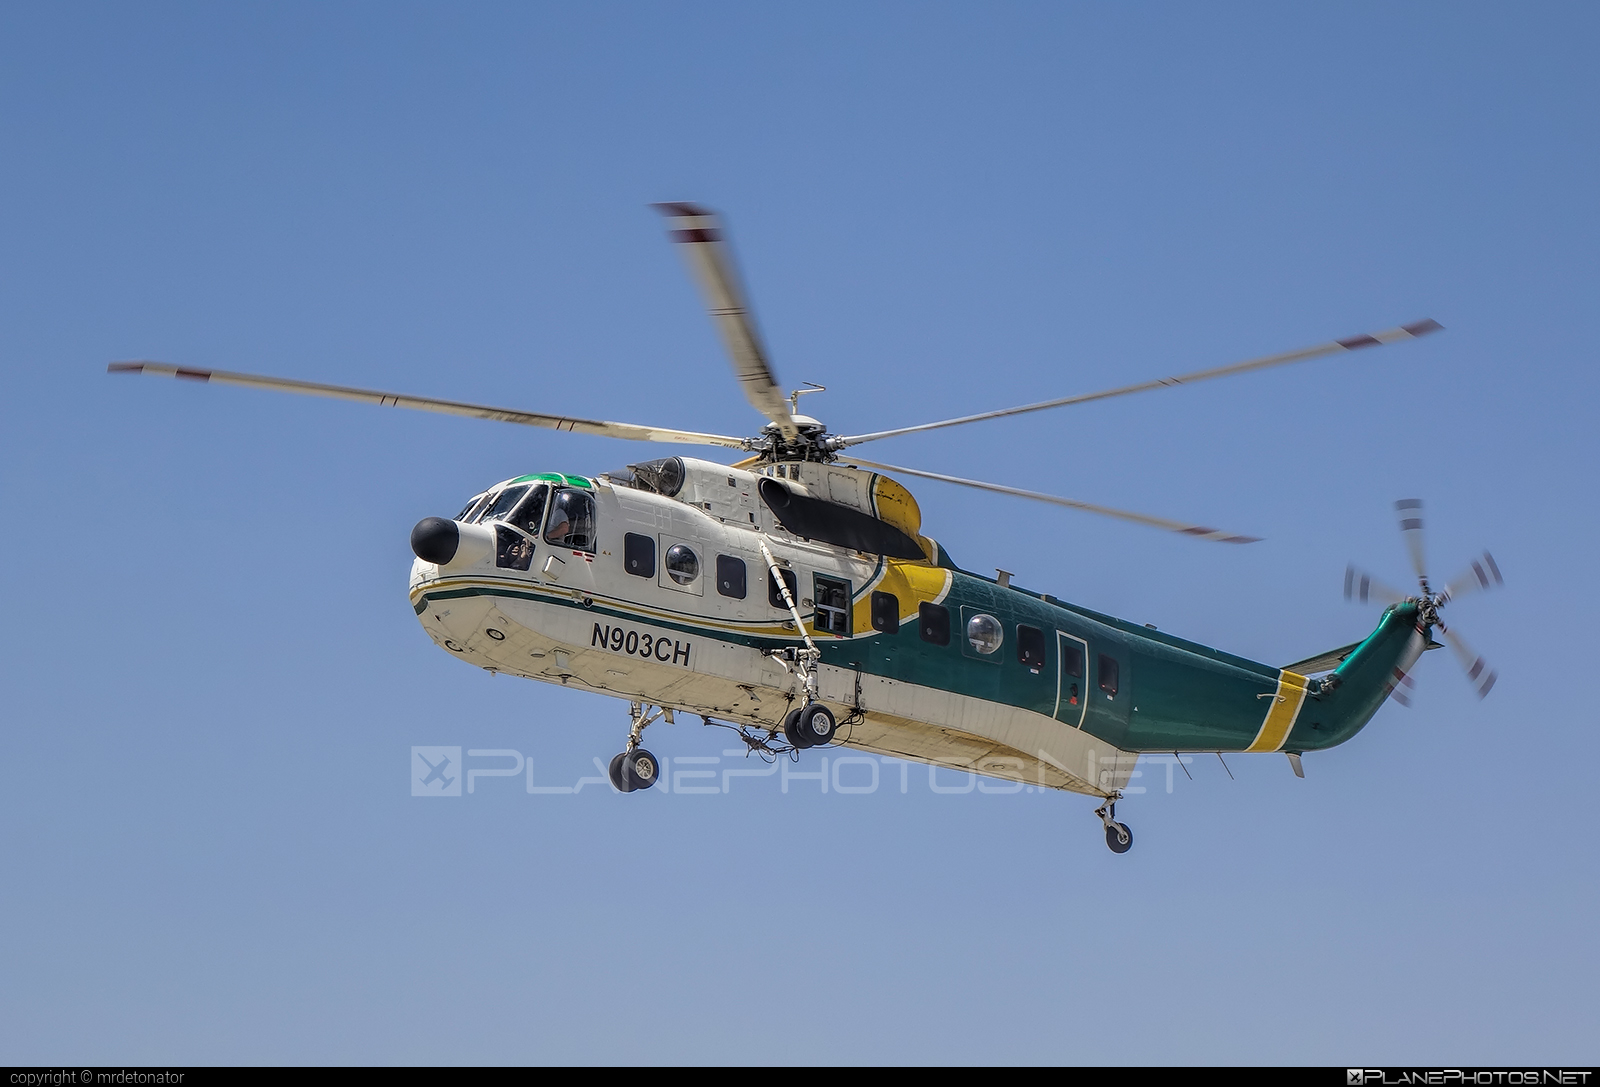 Sikorsky S-61N - N903CH operated by TVPX AIircraft Solutions #s61 #s61n #sikorsky #sikorsky61 #sikorskyS61 #sikorskyS61n #tvpxaircraftsolutions